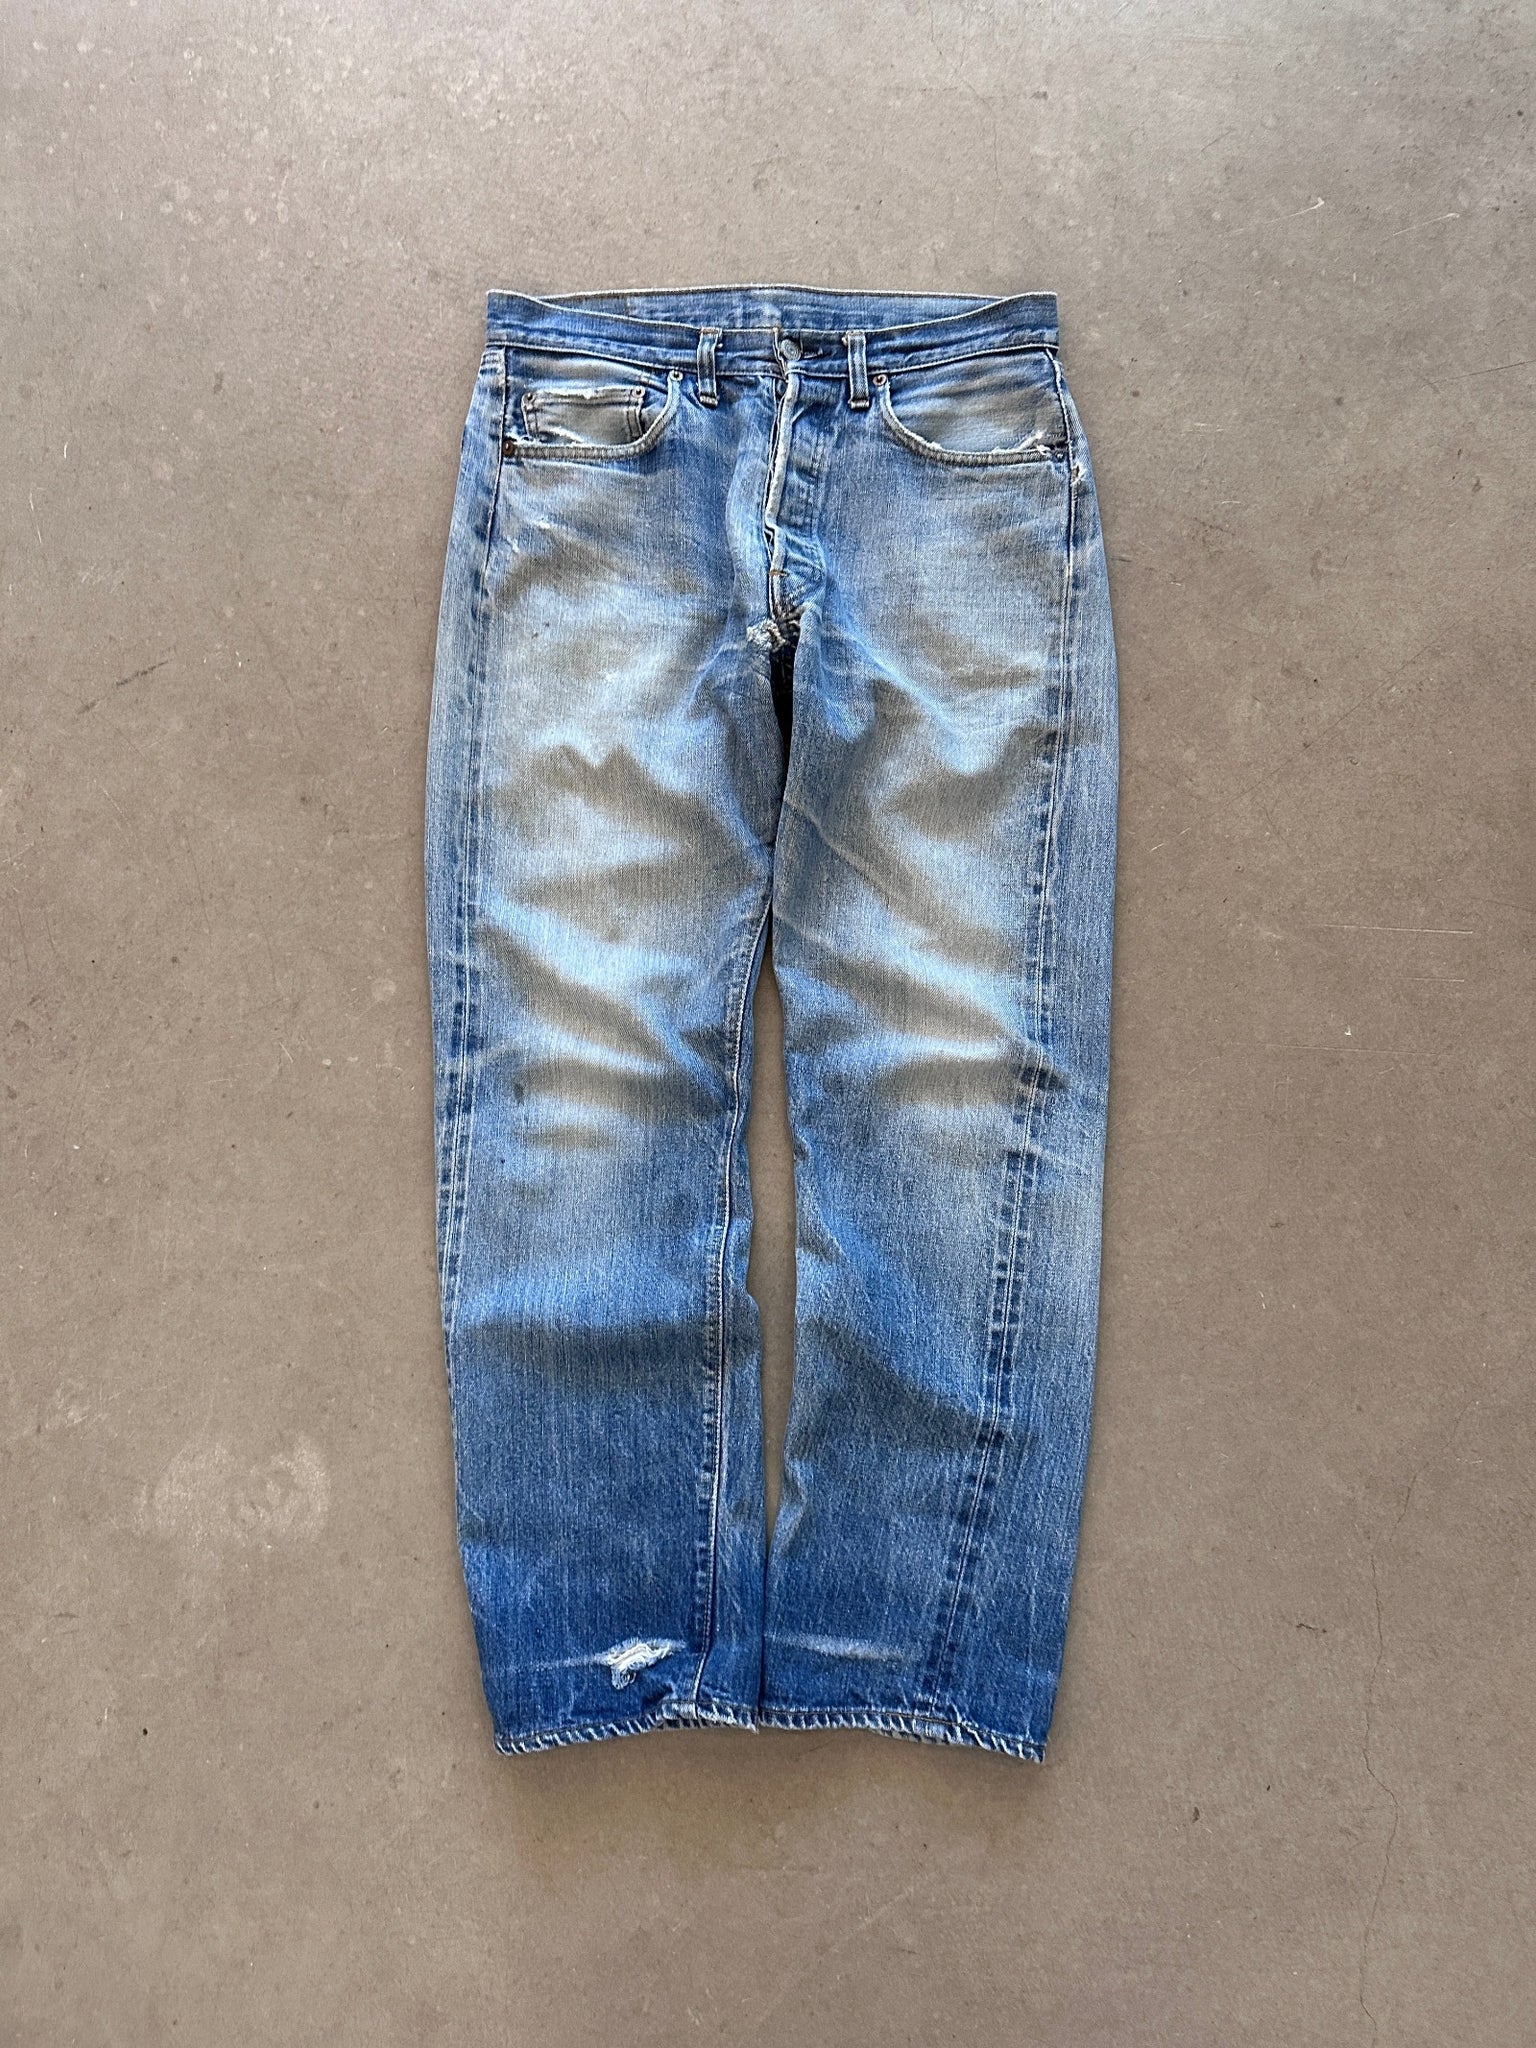 1970's Levi's Red Line 501 Jeans - 32 x 32